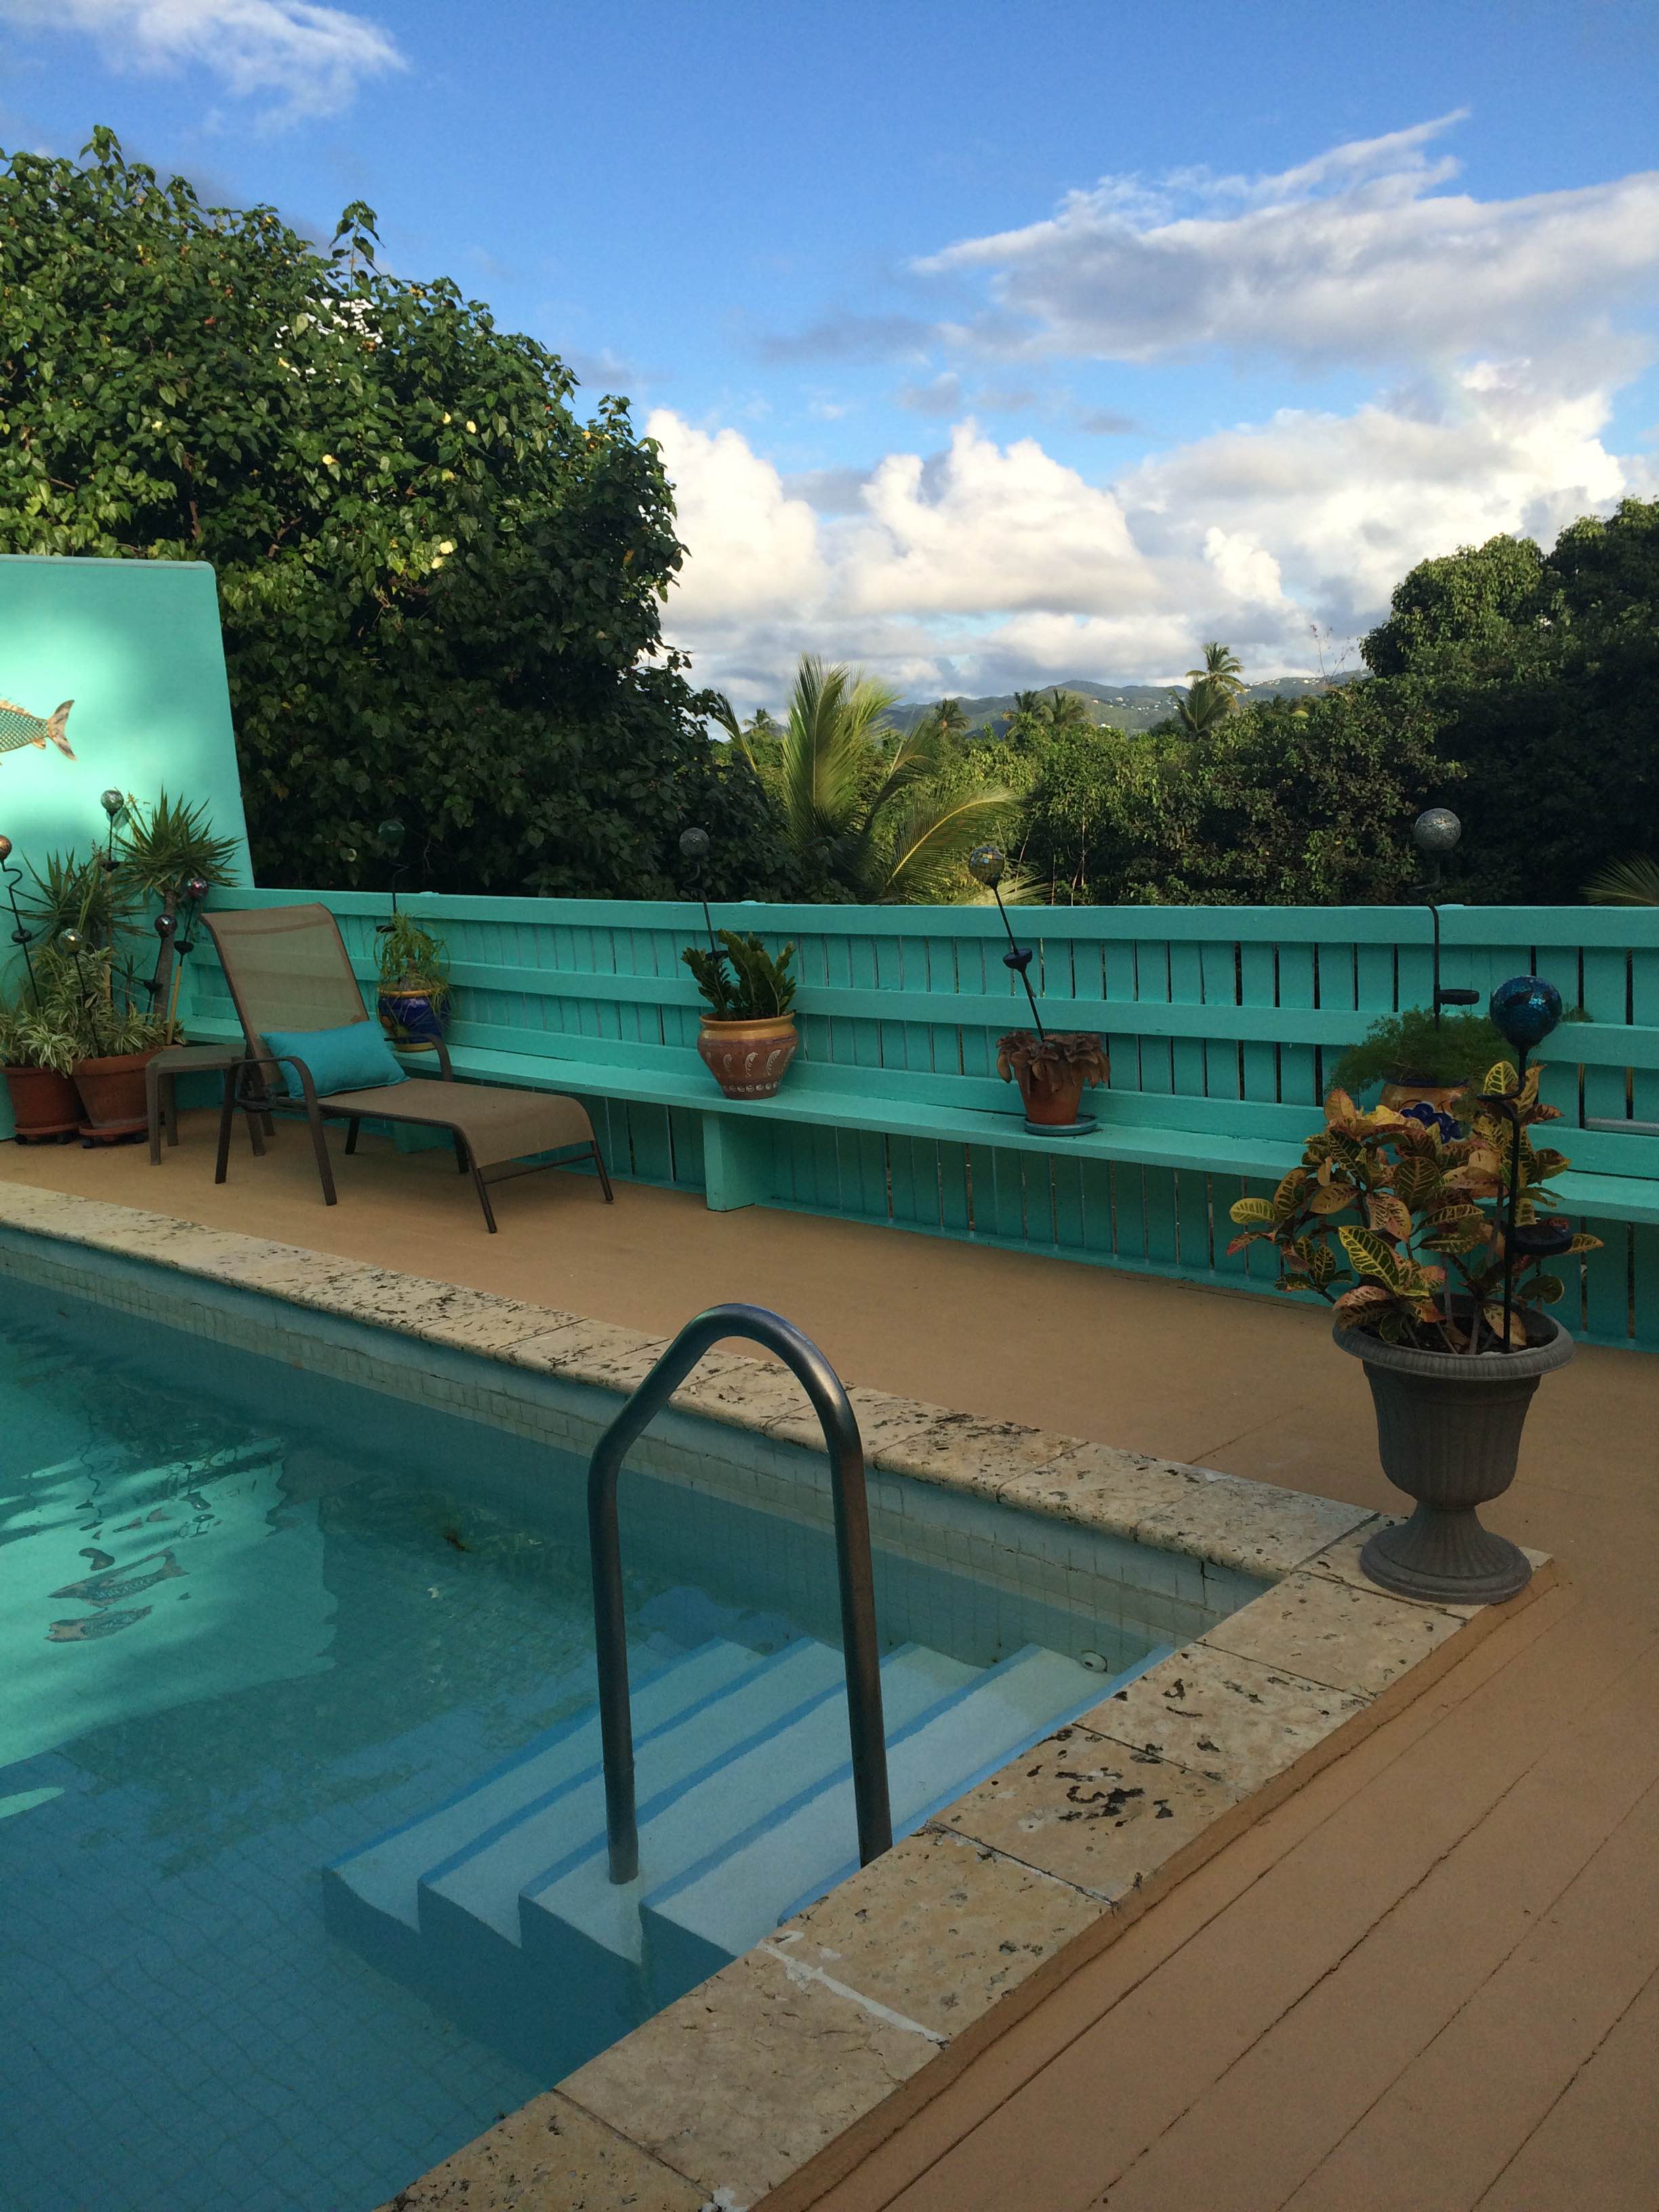 Pavilions and Pools, St. Thomas - USVI Travelogue {Katie at the Kitchen Door}